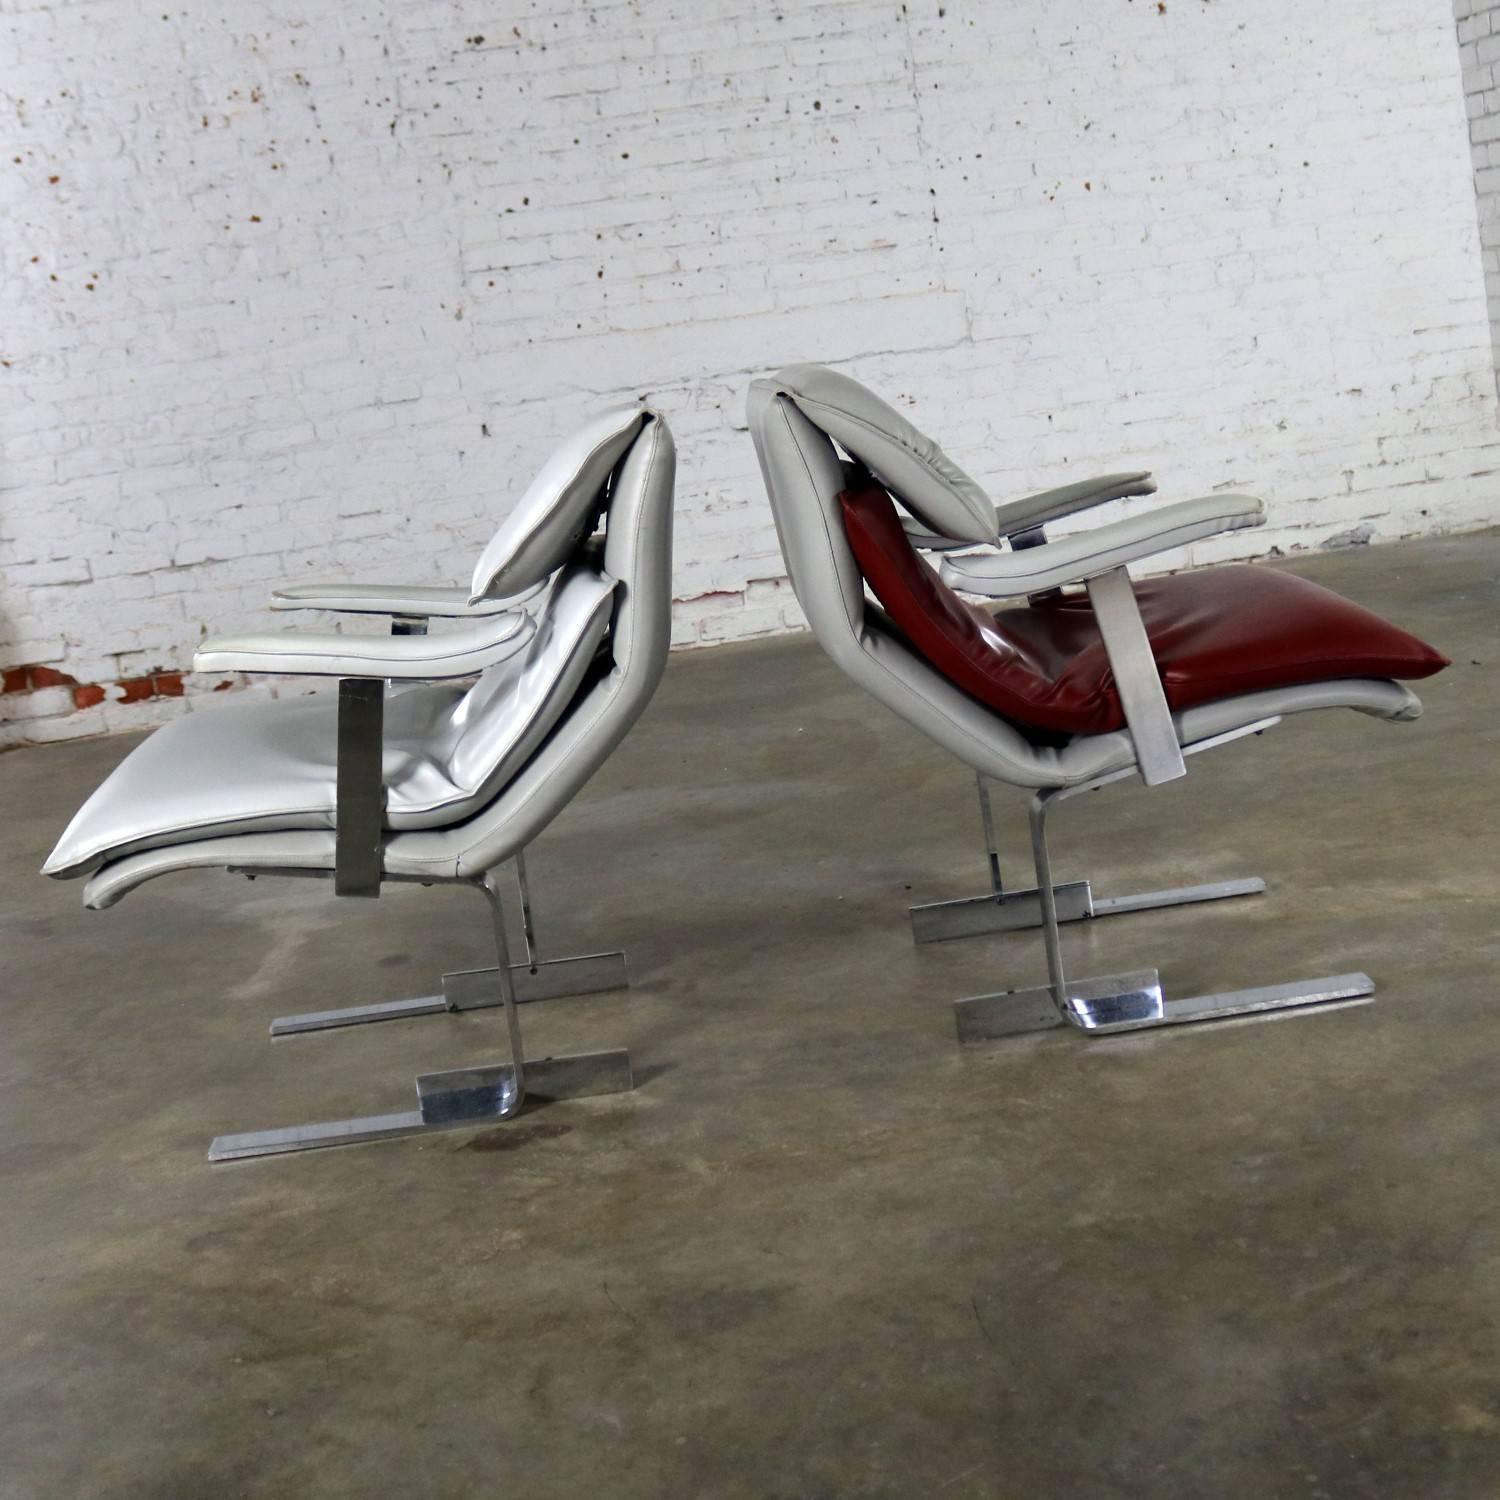 Two handsome lounge chairs produced by G. Maletti. These chairs are made in the style of the Onda chair by Giovanni Offredi for Saporiti Italia. They are in wonderful vintage condition. The chrome has minor scratching as you would expect with age.